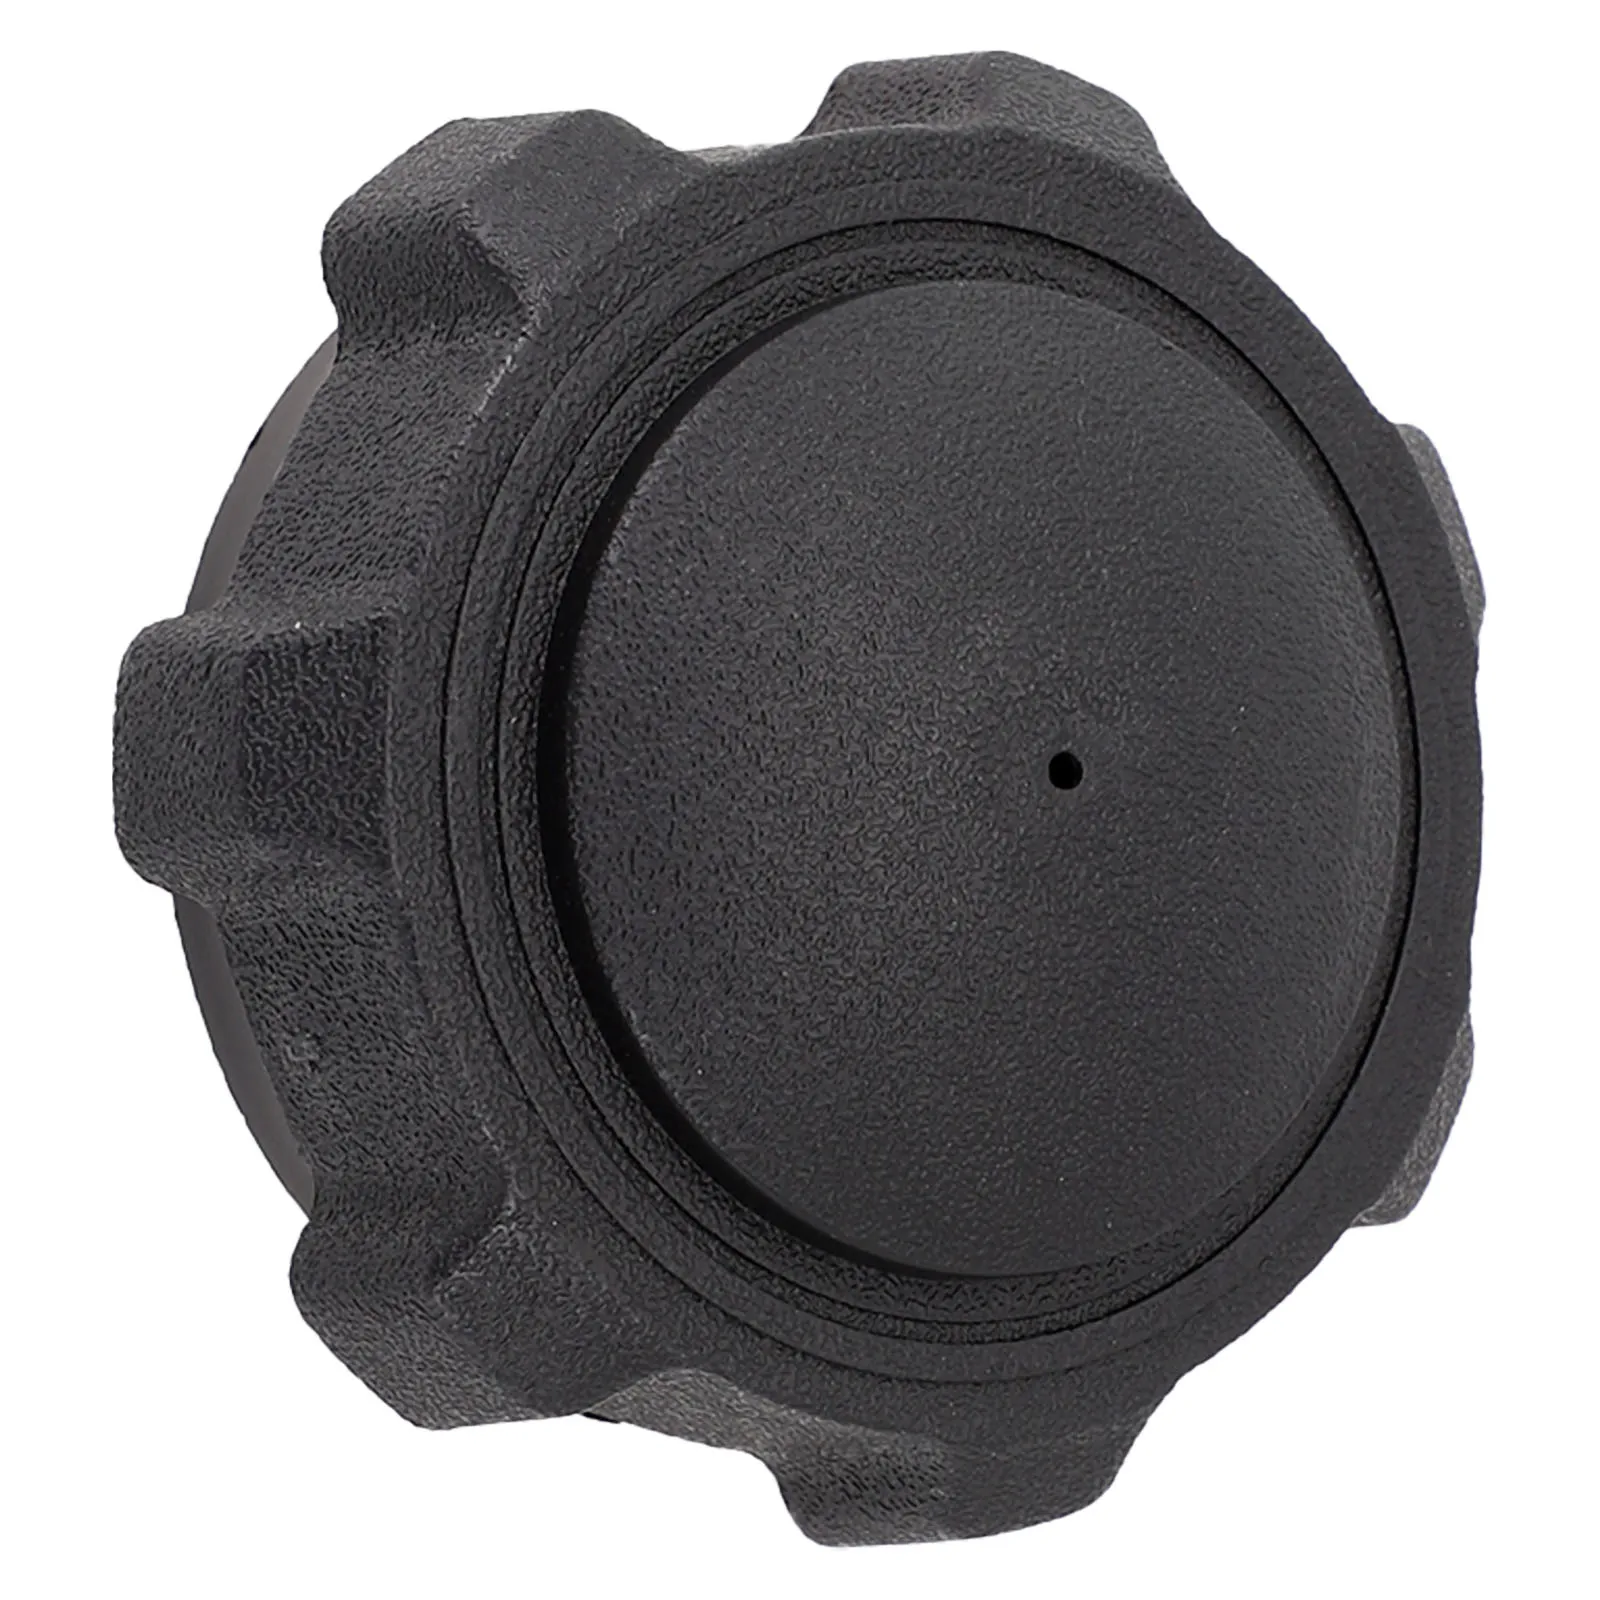 

Lawn Mower Fuel Tank Cover Replacements Vented For Troy-Bilt Gas Cap 751-0603B/951-3111 Garden Power Tools Spares